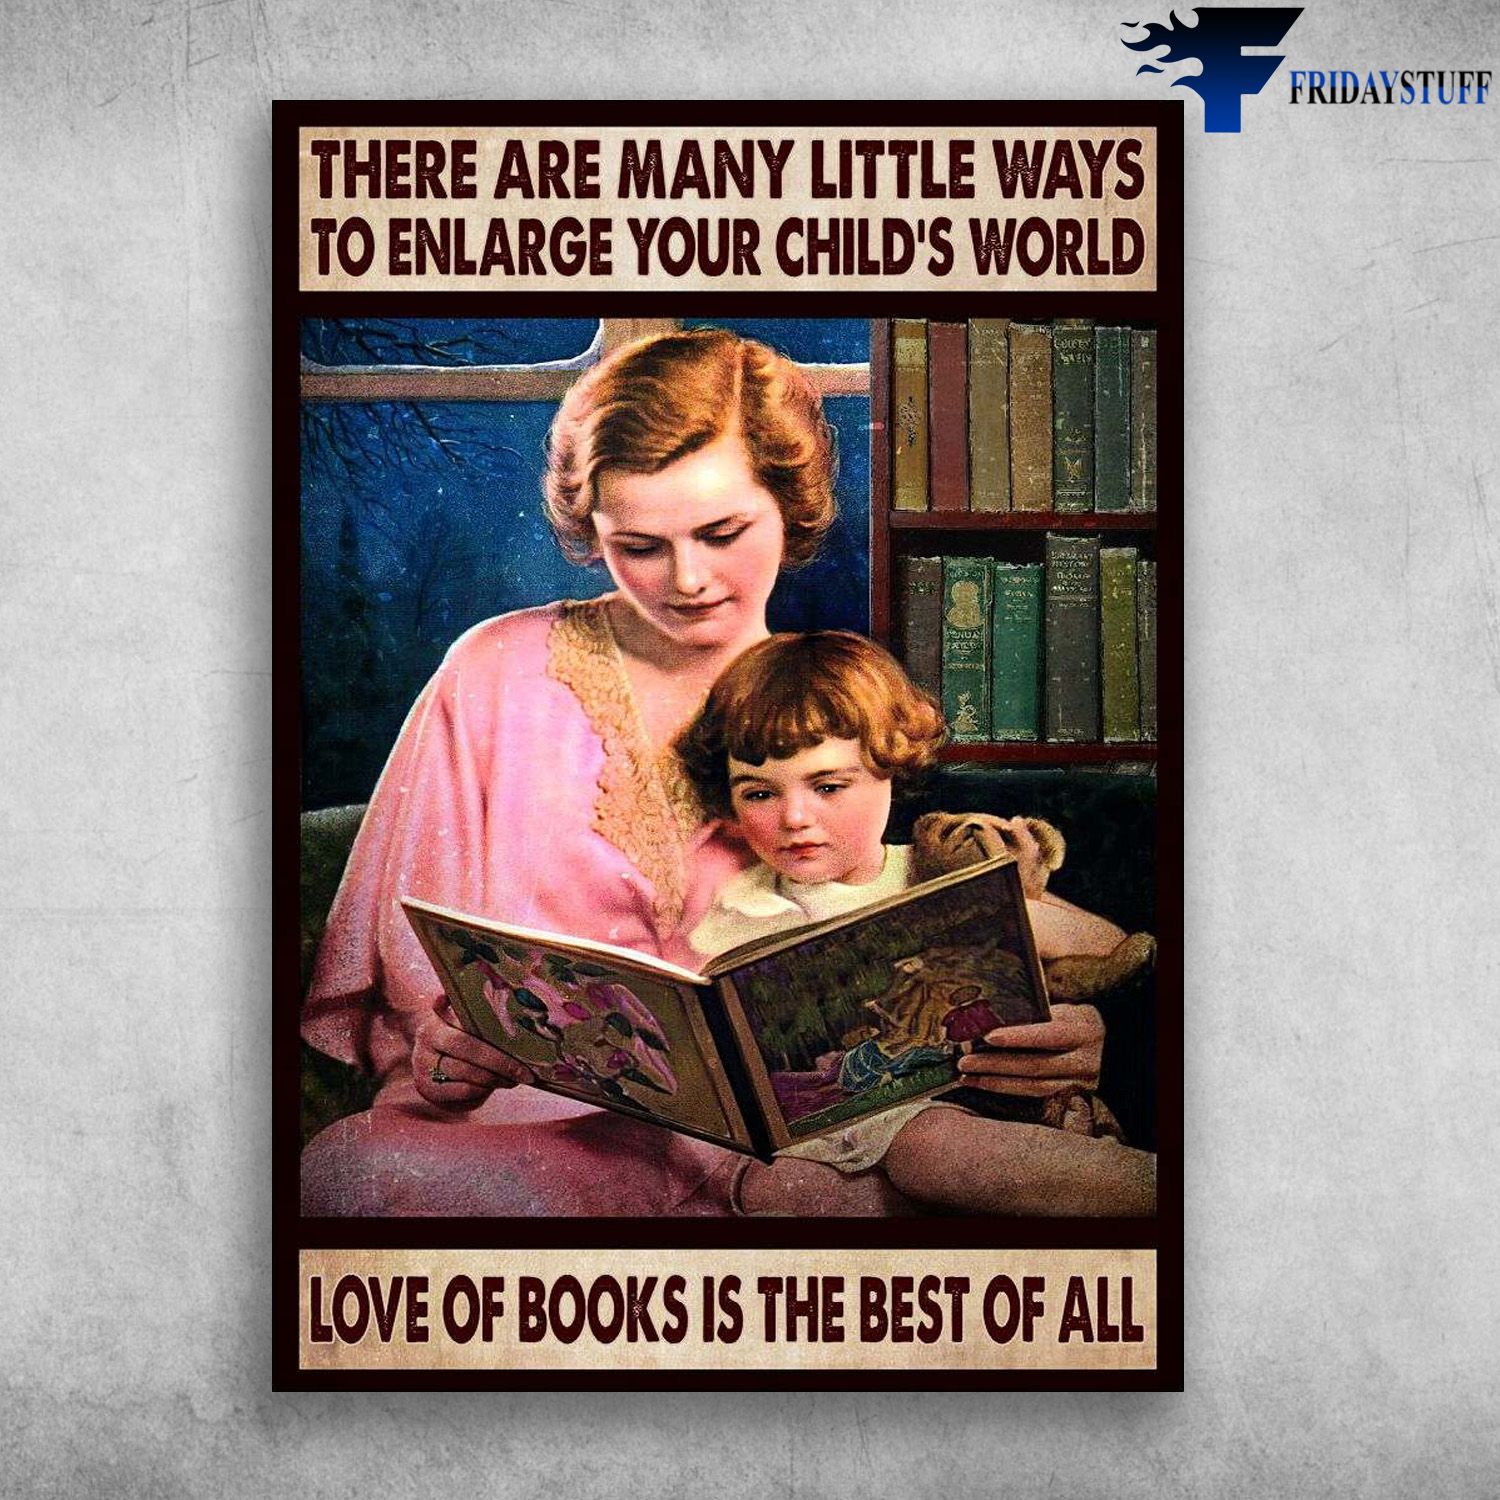 Mom And Daughter - There Are Many Little Ways, To Enlarge Your Child's World, Love Of Books Is The Best Of All